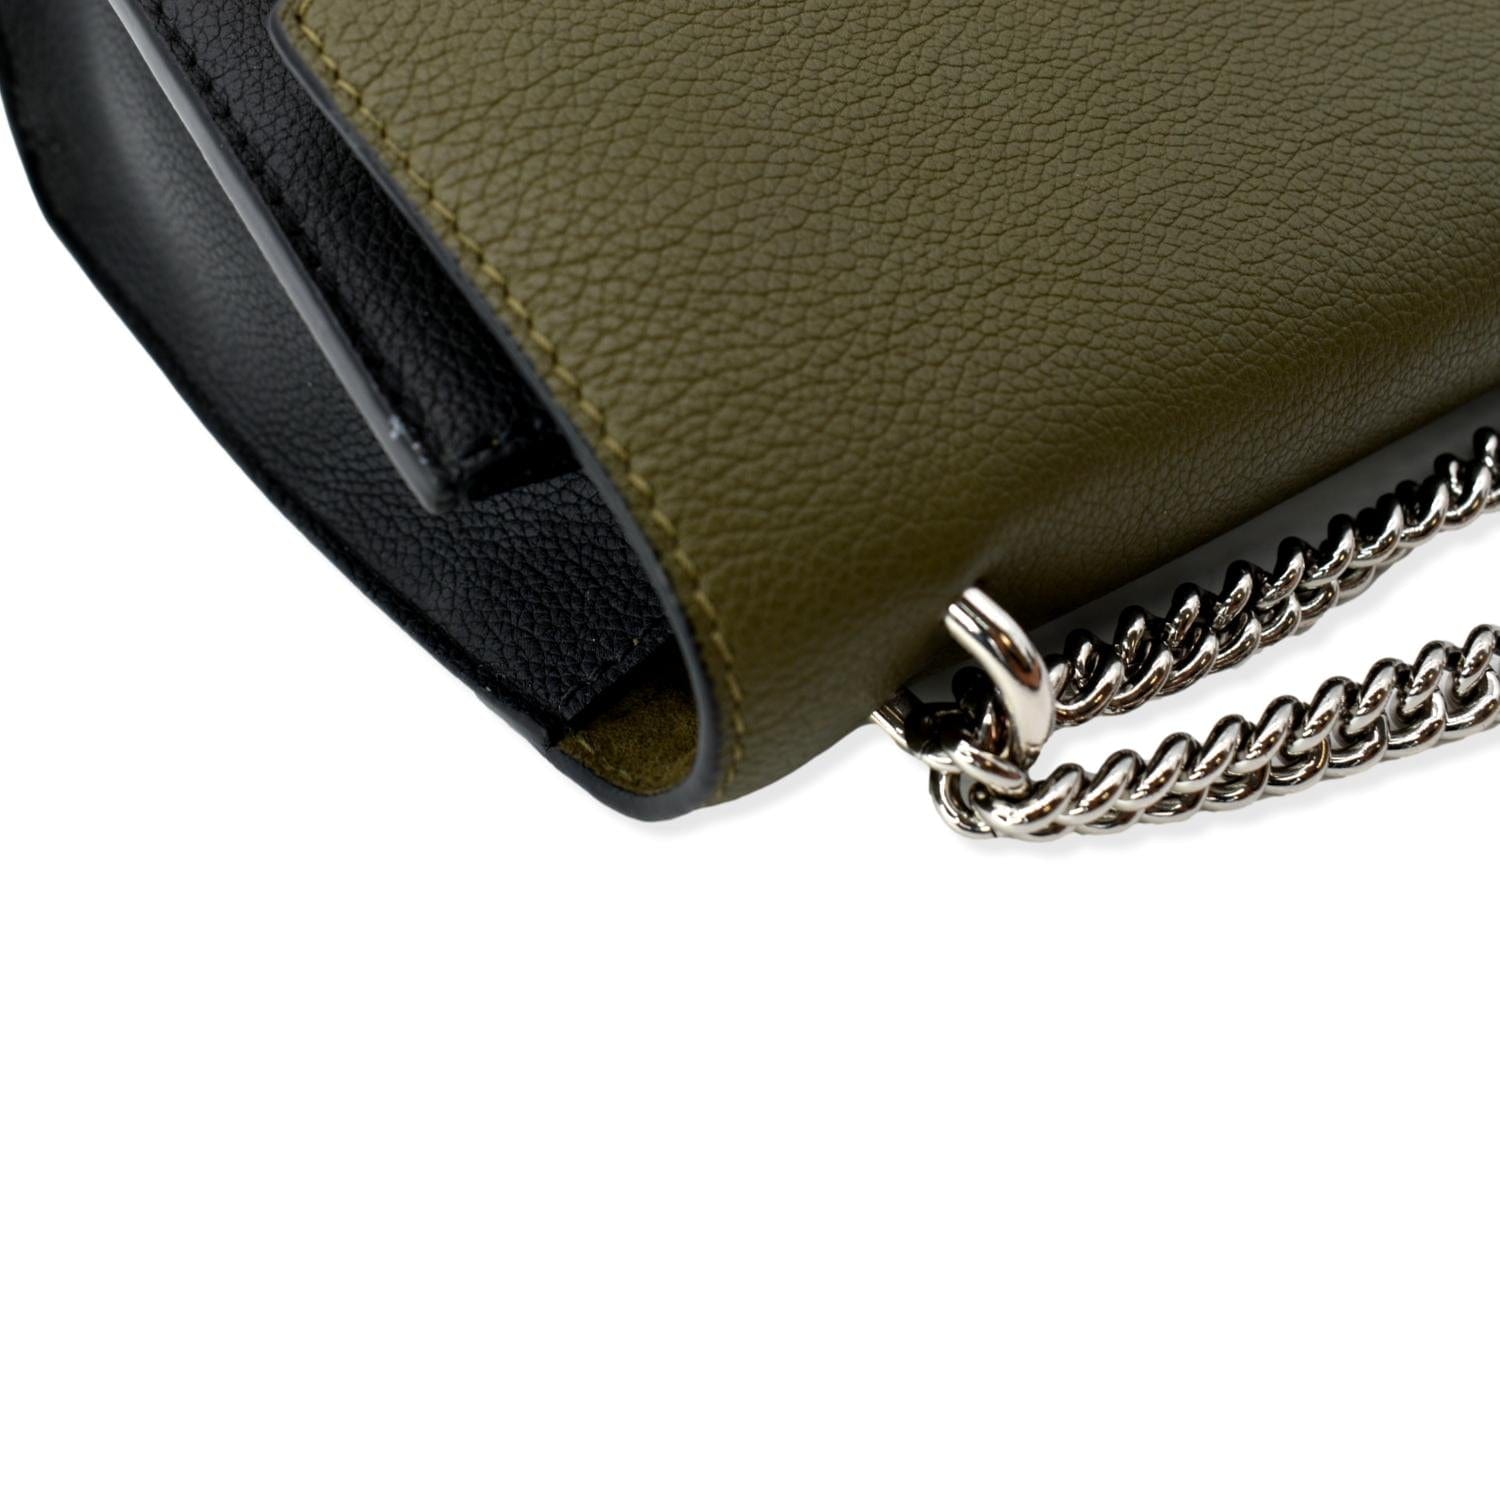 Louis Vuitton Tricolor Calf Leather MyLockme Chain Bag For Sale at